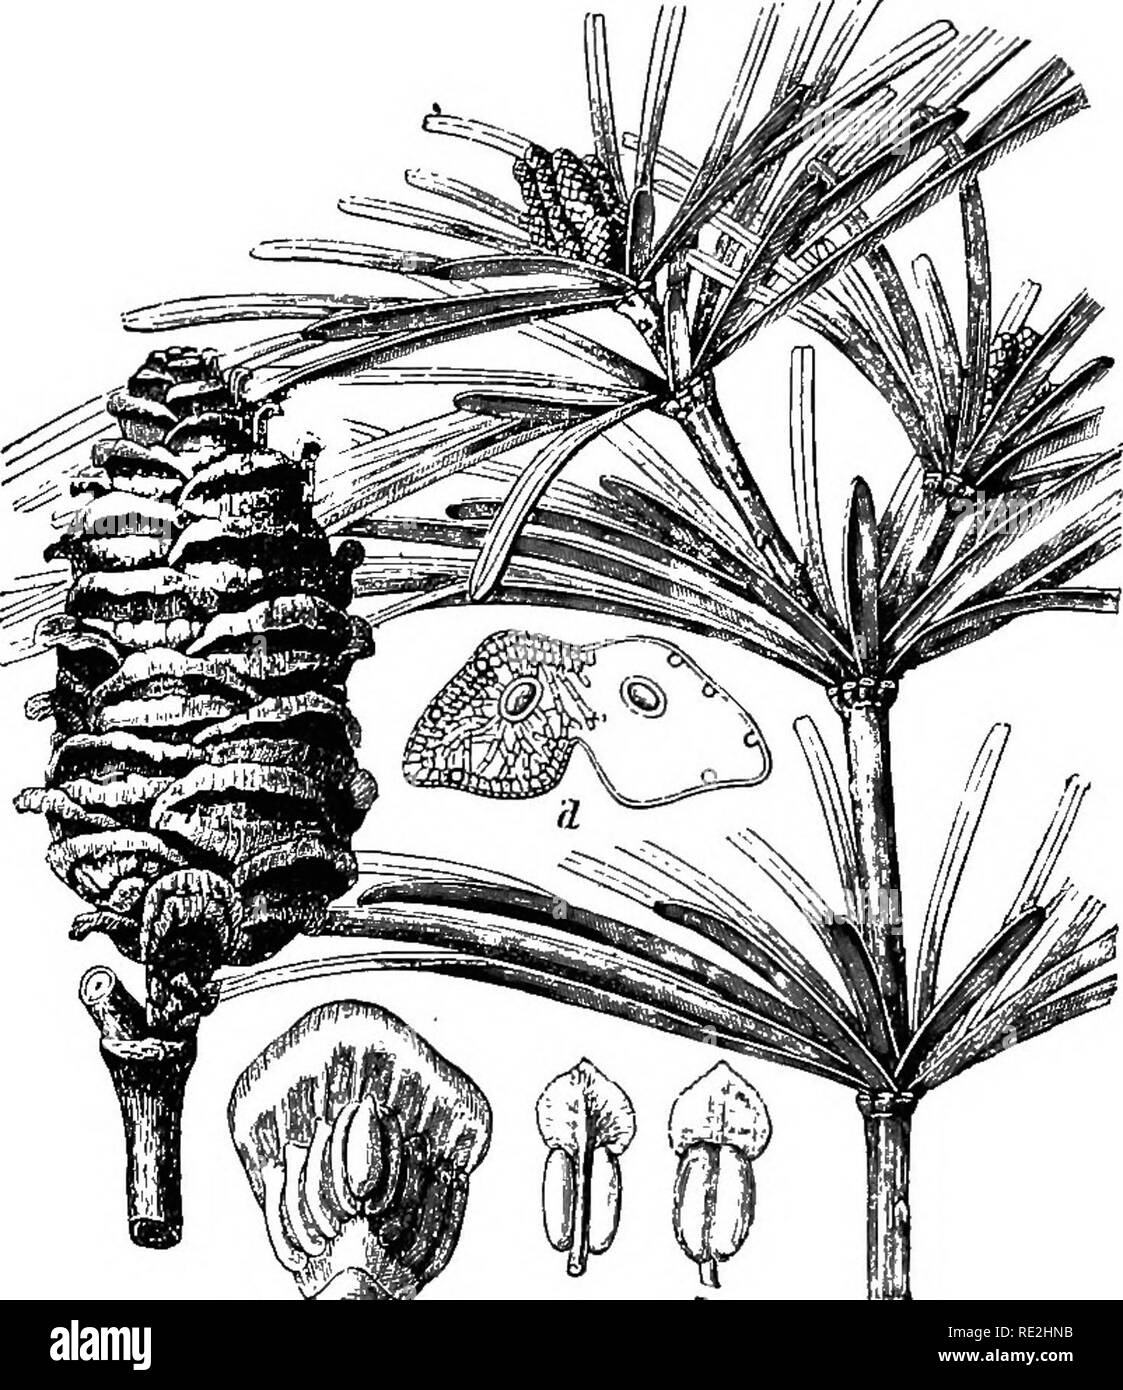 . Morphology of spermatophytes. [Part I. Gymnosperms]. Gymnosperms; Plant morphology. 66 MORPHOLOGY OP SPERMATOPHYTES phylloclads themselves only gradually acquire their peculiar character (Fig. 42, E, F). The juvenile forms of Sciadopitys, like those of Pinus, show simple needle leaves upon long shoots, but later scales occur instead of needles, and in their axils the peculiar double needle leaves are developed. Goebel suggests that the juvenile forms probably represent the more primitive form. These facts in connection with the. ITiG. 41.—Sdadopitys vertidllata: at the left an ovulate strobi Stock Photo